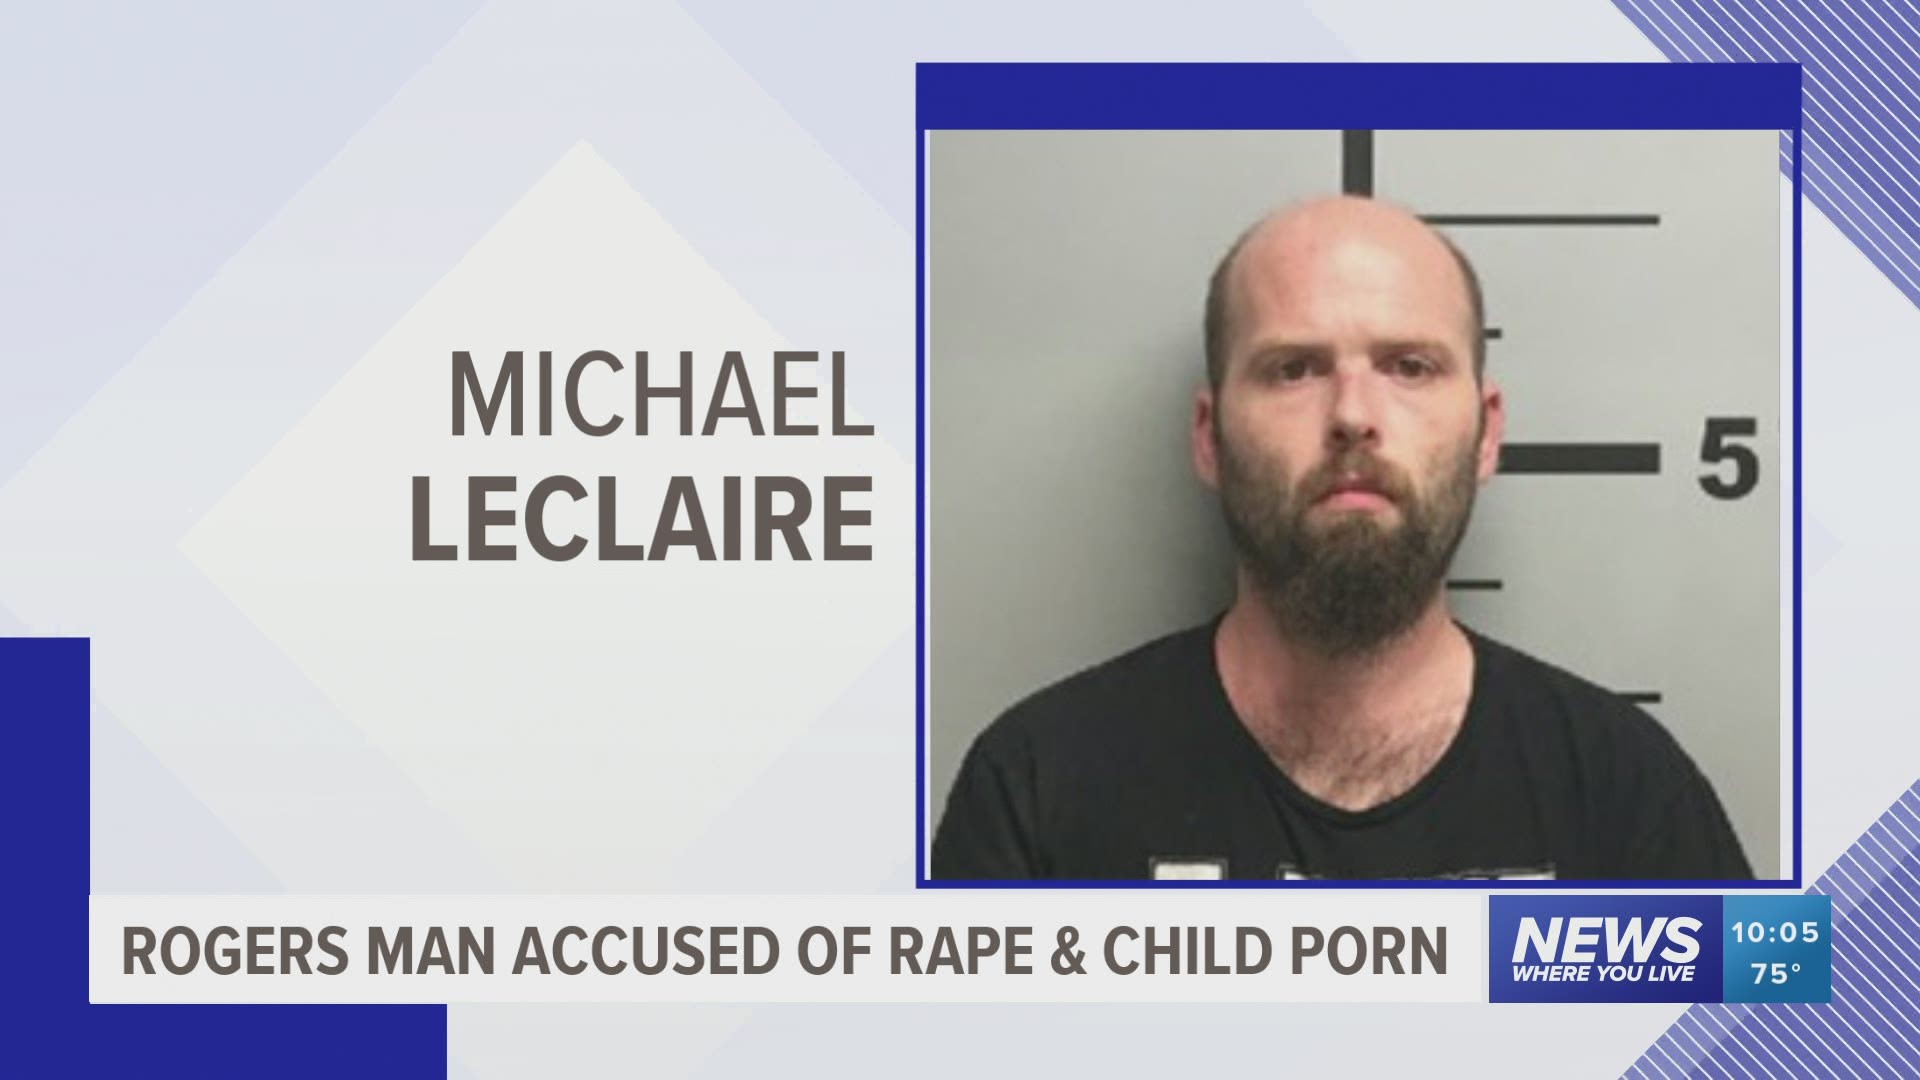 Mike LeClaire faces 20 charges including Rape and possessing/producing child pornography. https://bit.ly/3gh1wcS